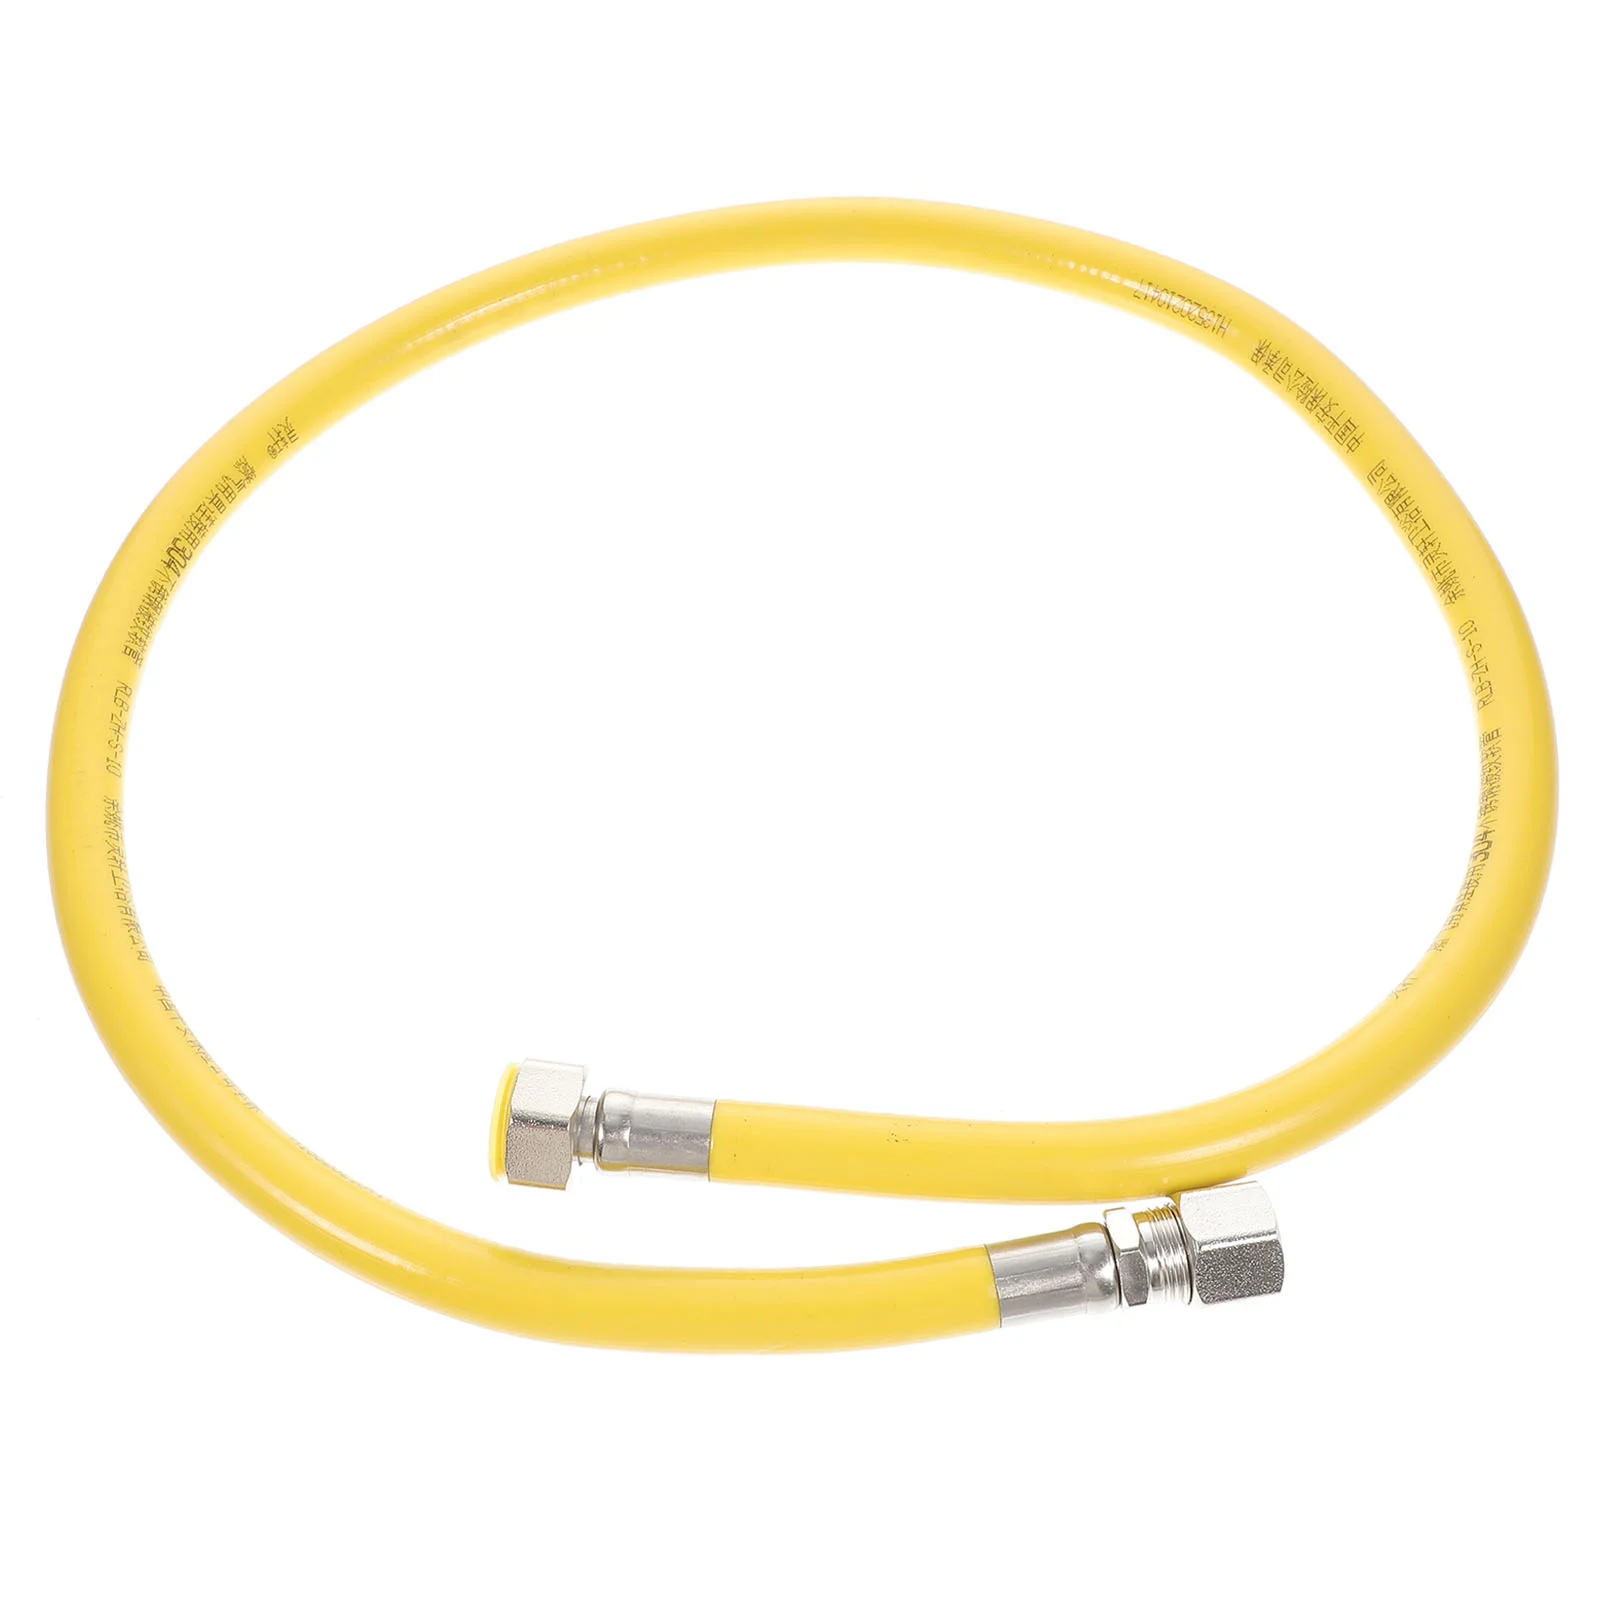 

Gas Linetubing Hose Propane Stove Dryer Heaters Furnace Flexible Connector Equipmentrange Appliance Natural